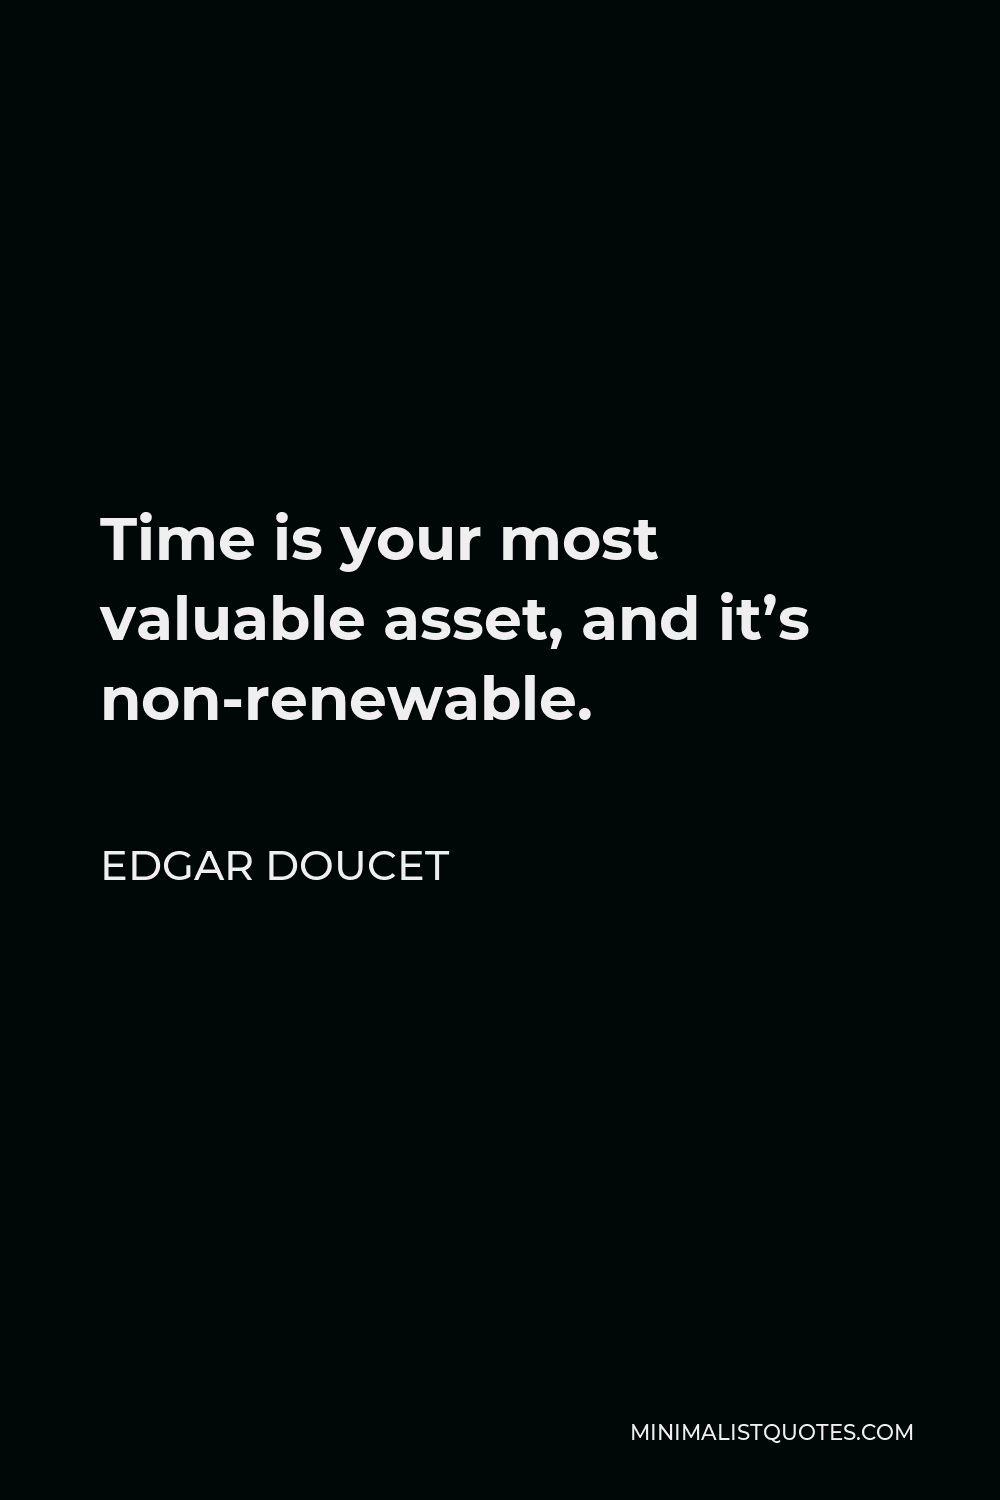 Edgar Doucet Quote - Time is your most valuable asset, and it’s non-renewable.